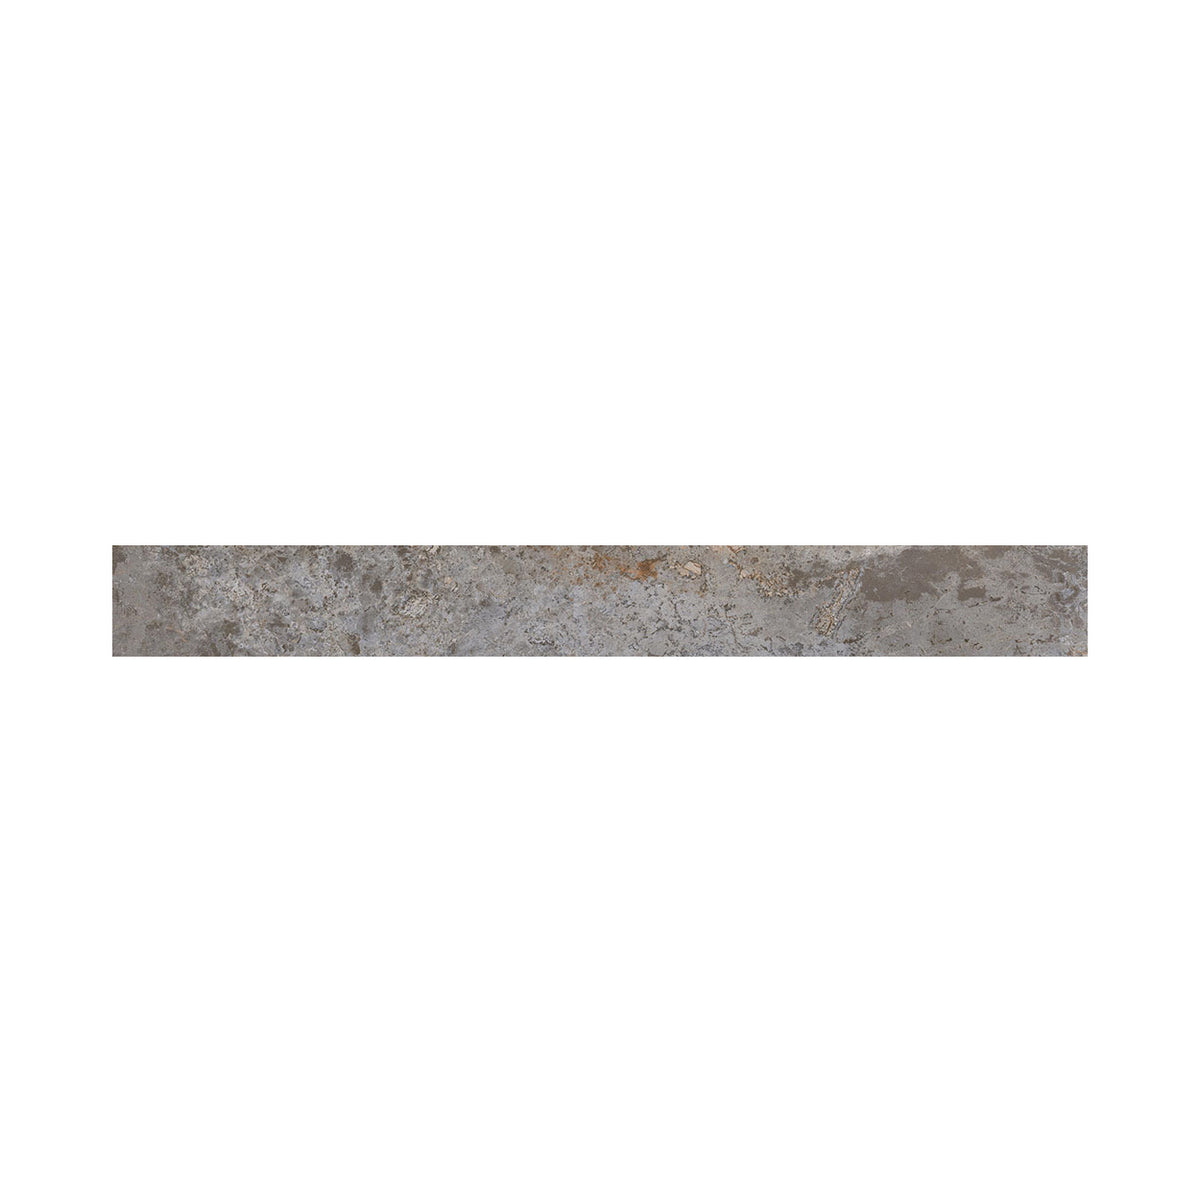 Floors 2000 - Amazon 3 in. x 12 in. Porcelain Bullnose - Grey Polished